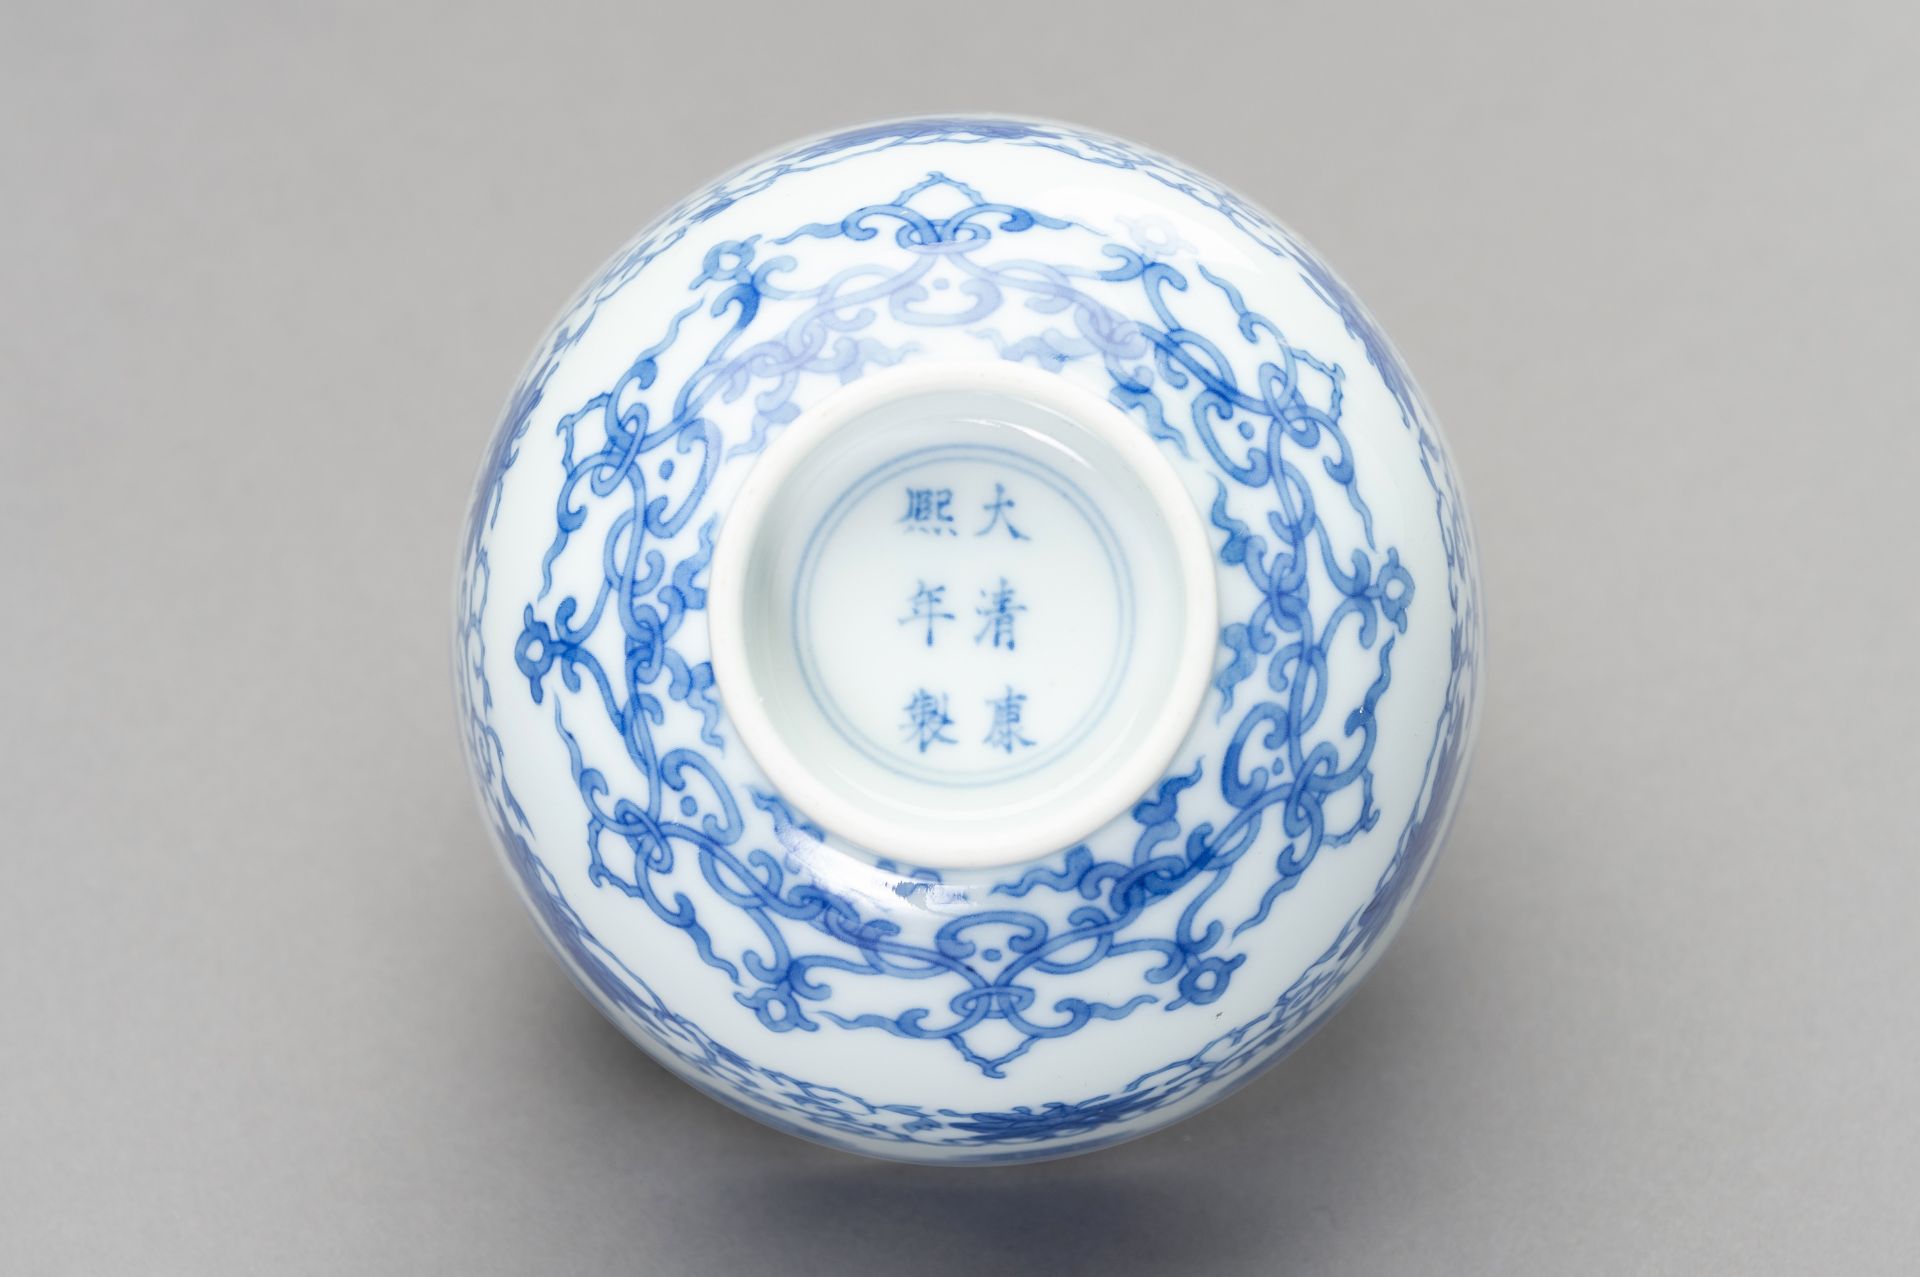 A BLUE AND WHITE KANGXI REVIVAL BOWL, LATE QING TO REPUBLIC - Image 8 of 11